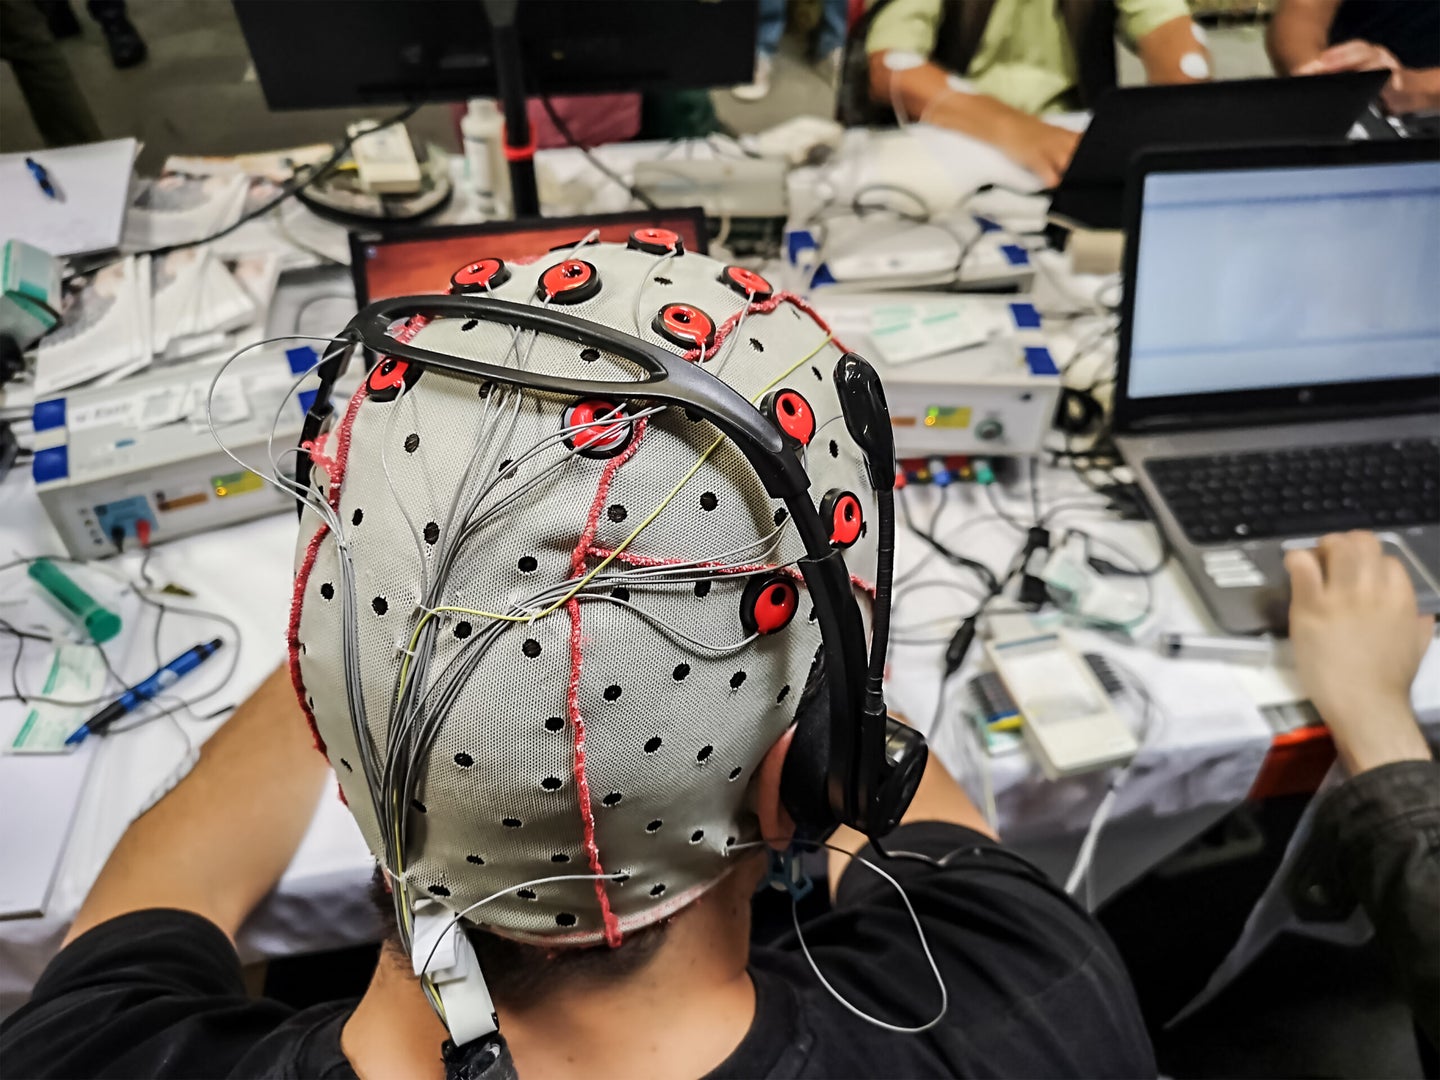 Brain-computer interfaces can take different forms, such as an EEG cap or implant in the brain.